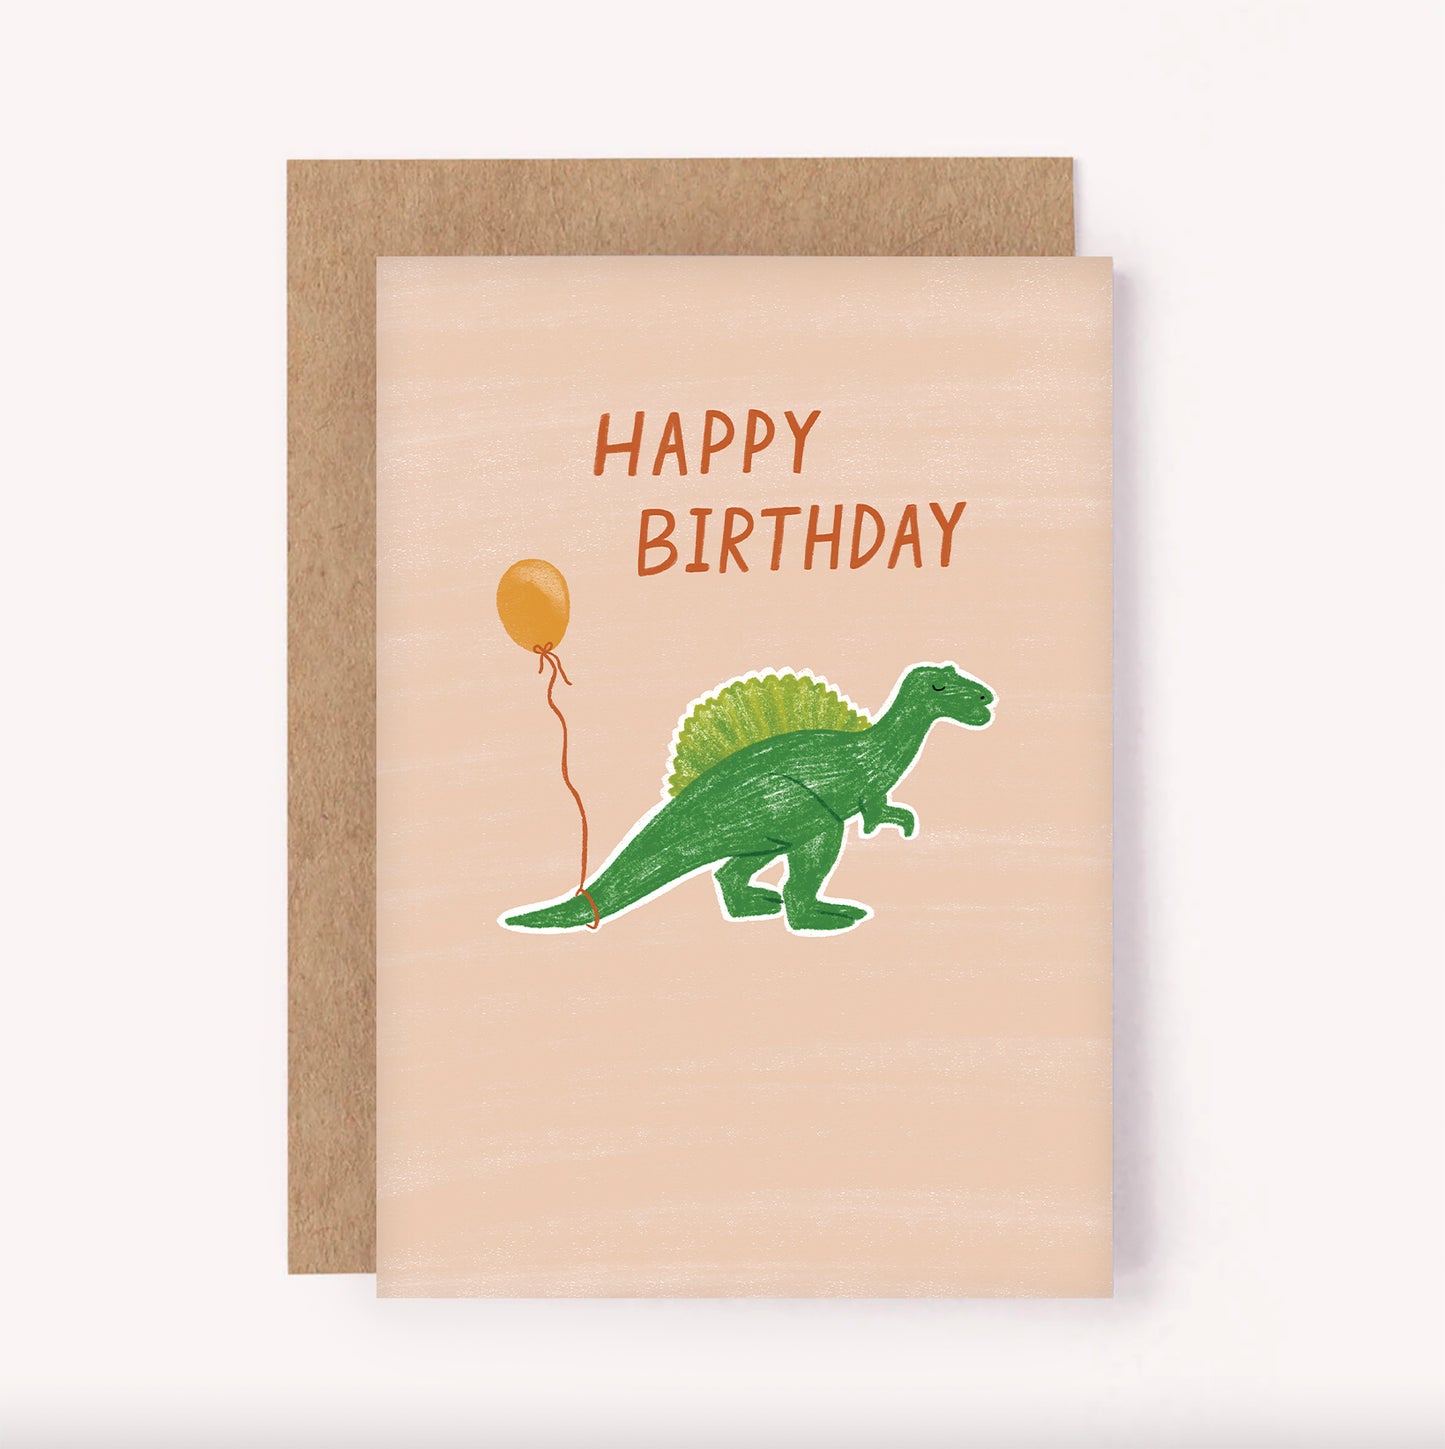 Cute, illustrated birthday card featuring a dinosaur with a balloon tied to its tail and hand-lettered "Happy Birthday". Beige background with green dinosaur, perfect for a children's birthday 